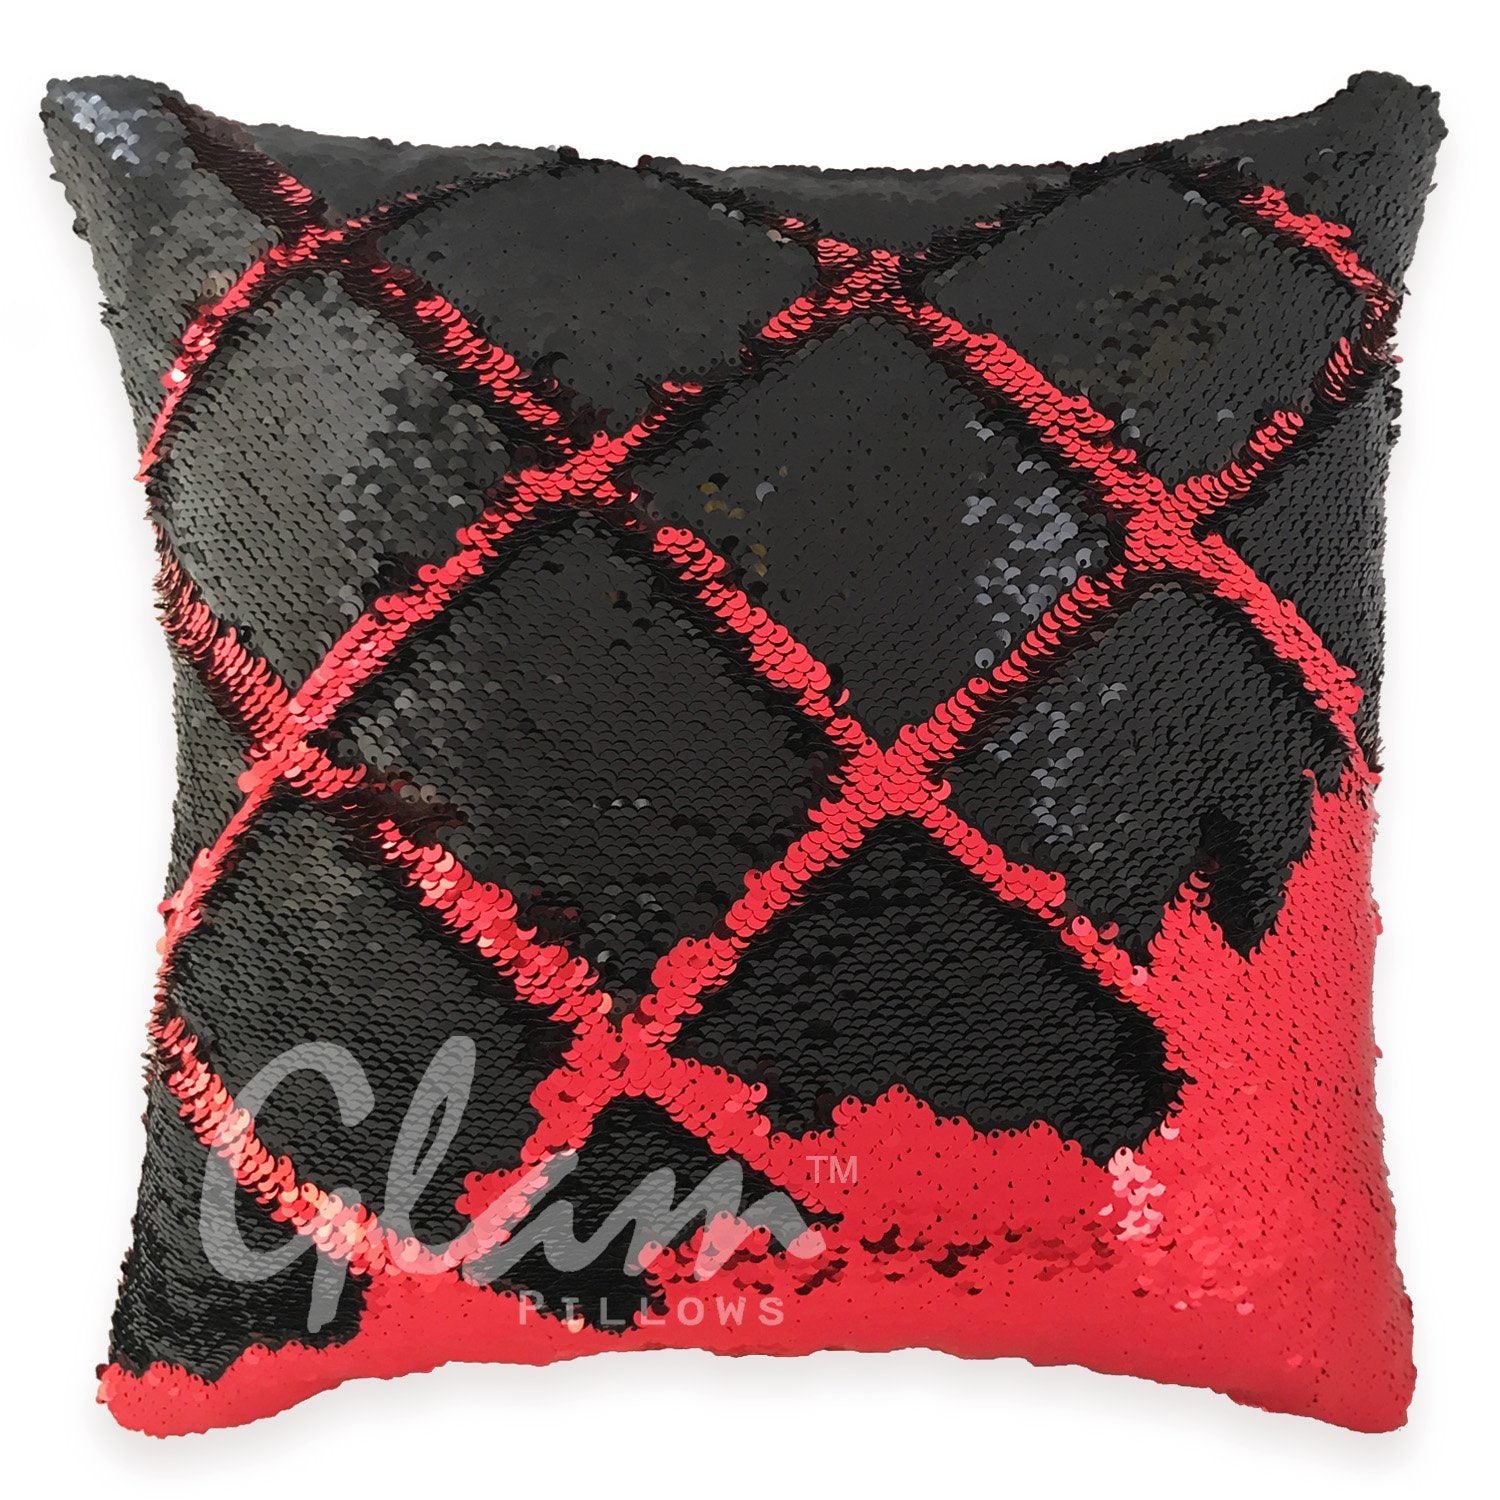 Red & Black Reversible Sequin Glam Pillow - Glam Pillows